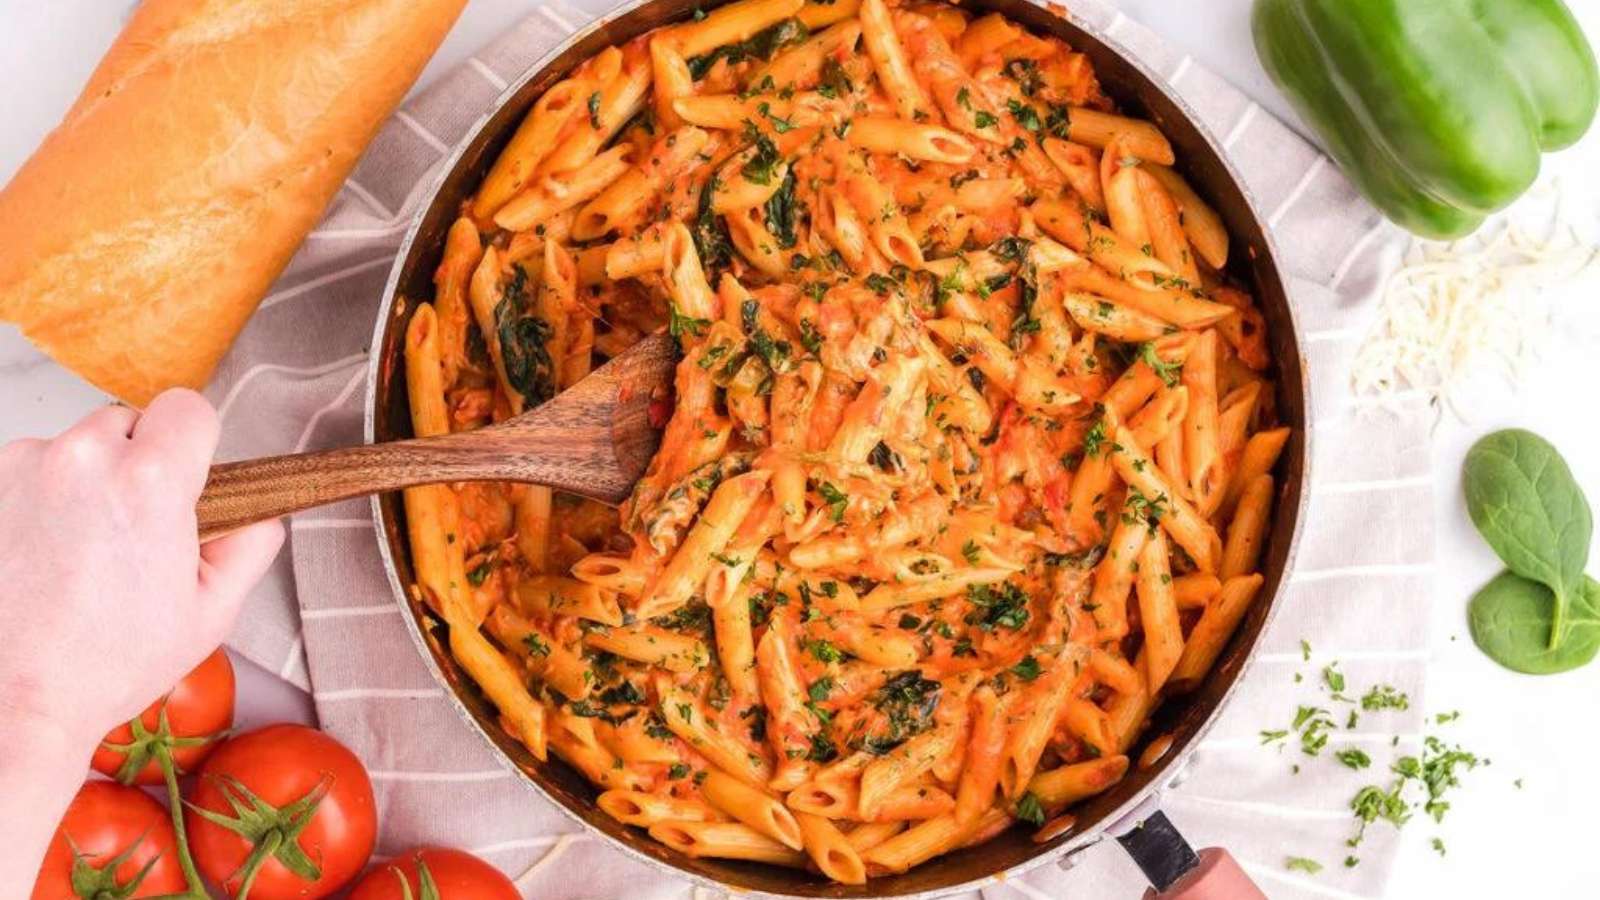 Penne pasta with spinach and tomatoes in a pan with a wooden spoon.